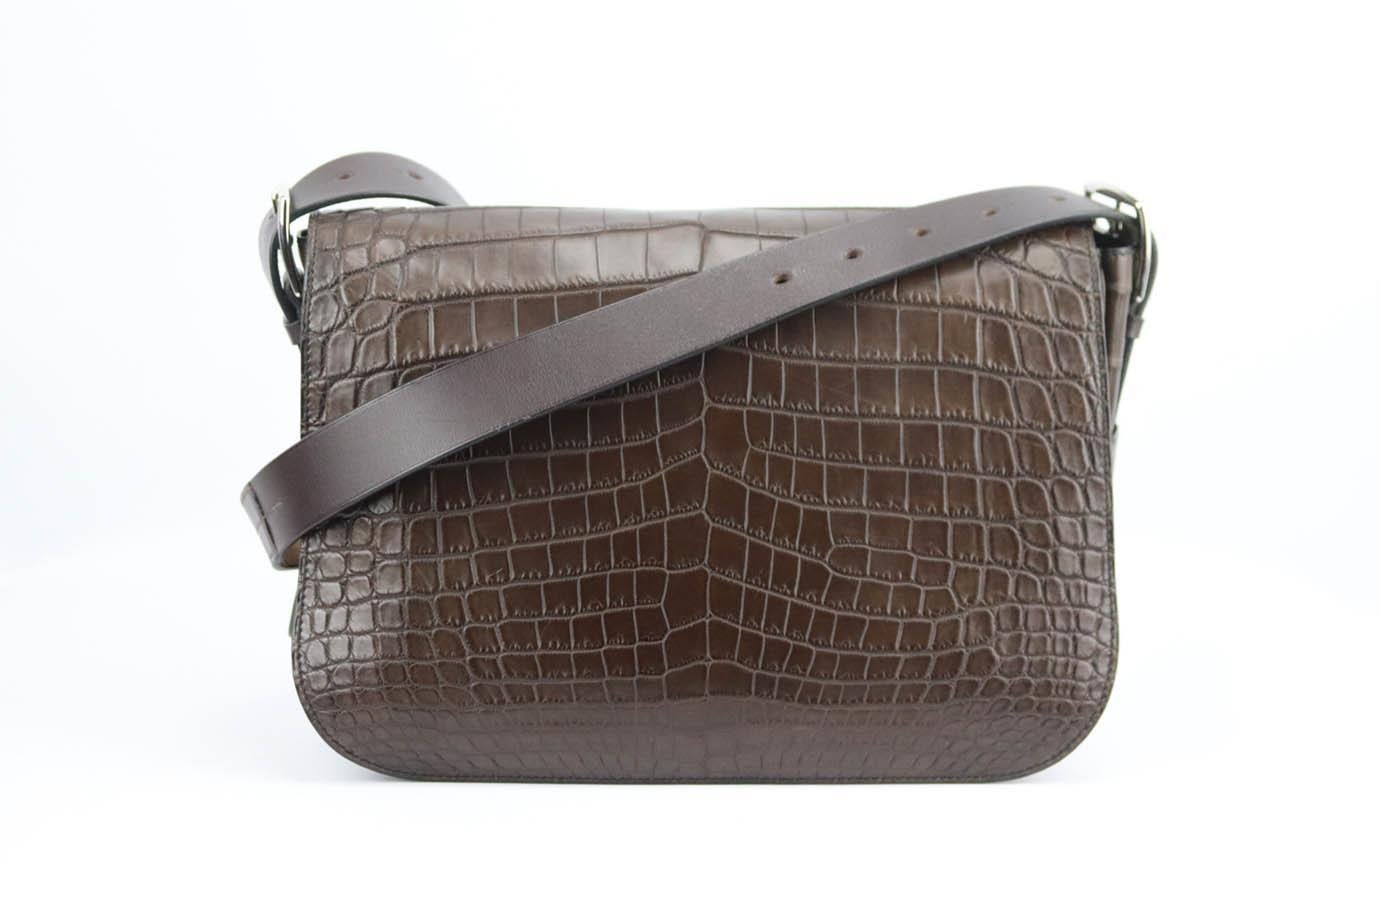 Hermès 2015 Barda 30cm matte niloticus crocodile leather bag. Made in France, this beautiful 2015 Hermès ‘Barda’ shoulder bag has been made from brown-tone ‘Matte Niloticus Crocodile’ exterior in ‘Ebene’ with matching leather interior, this piece is